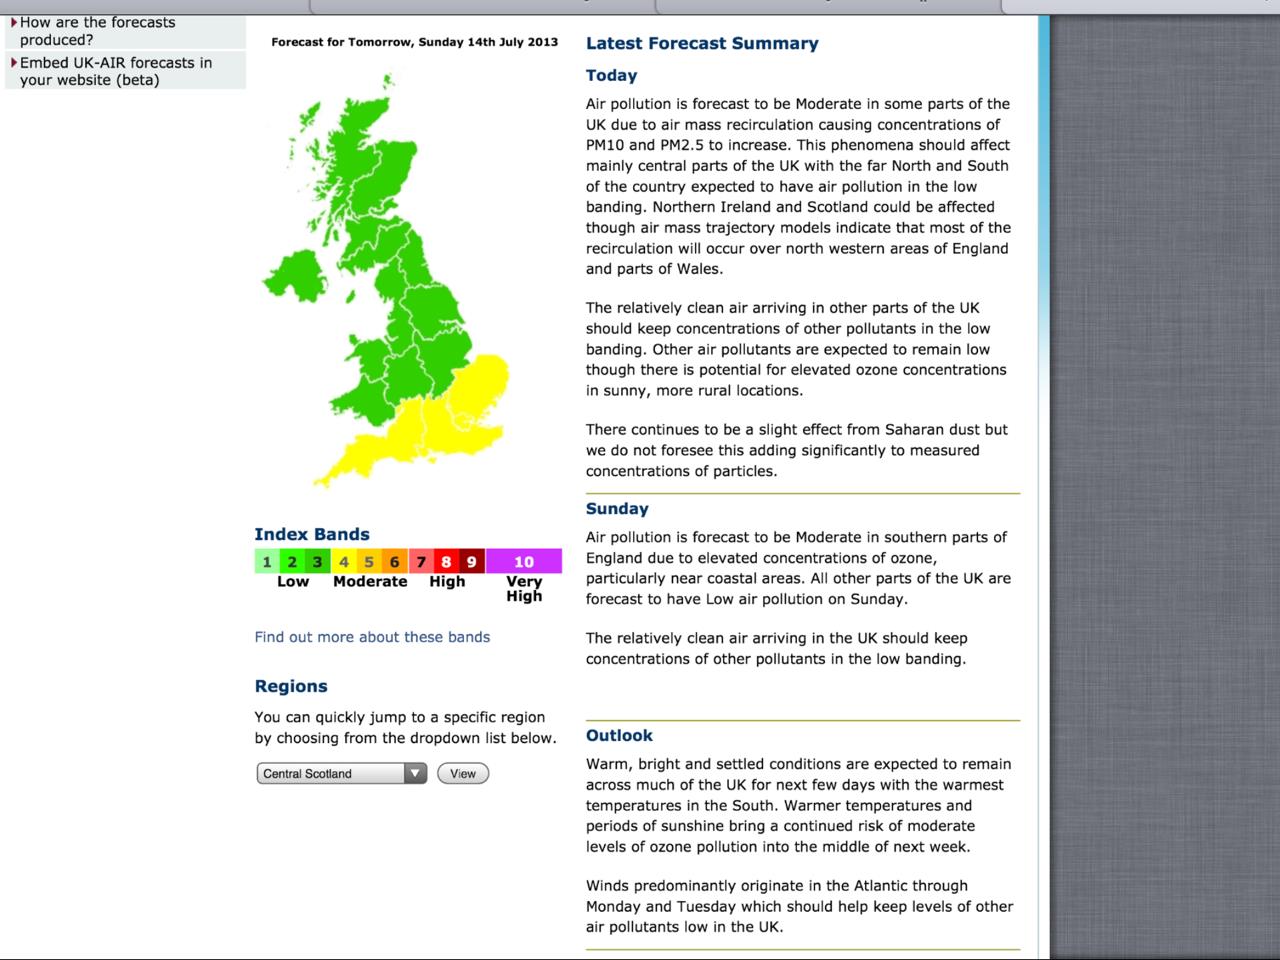 Exhibit 5 Defra forecast on Saturday 130713 for that day and Sunday 140713